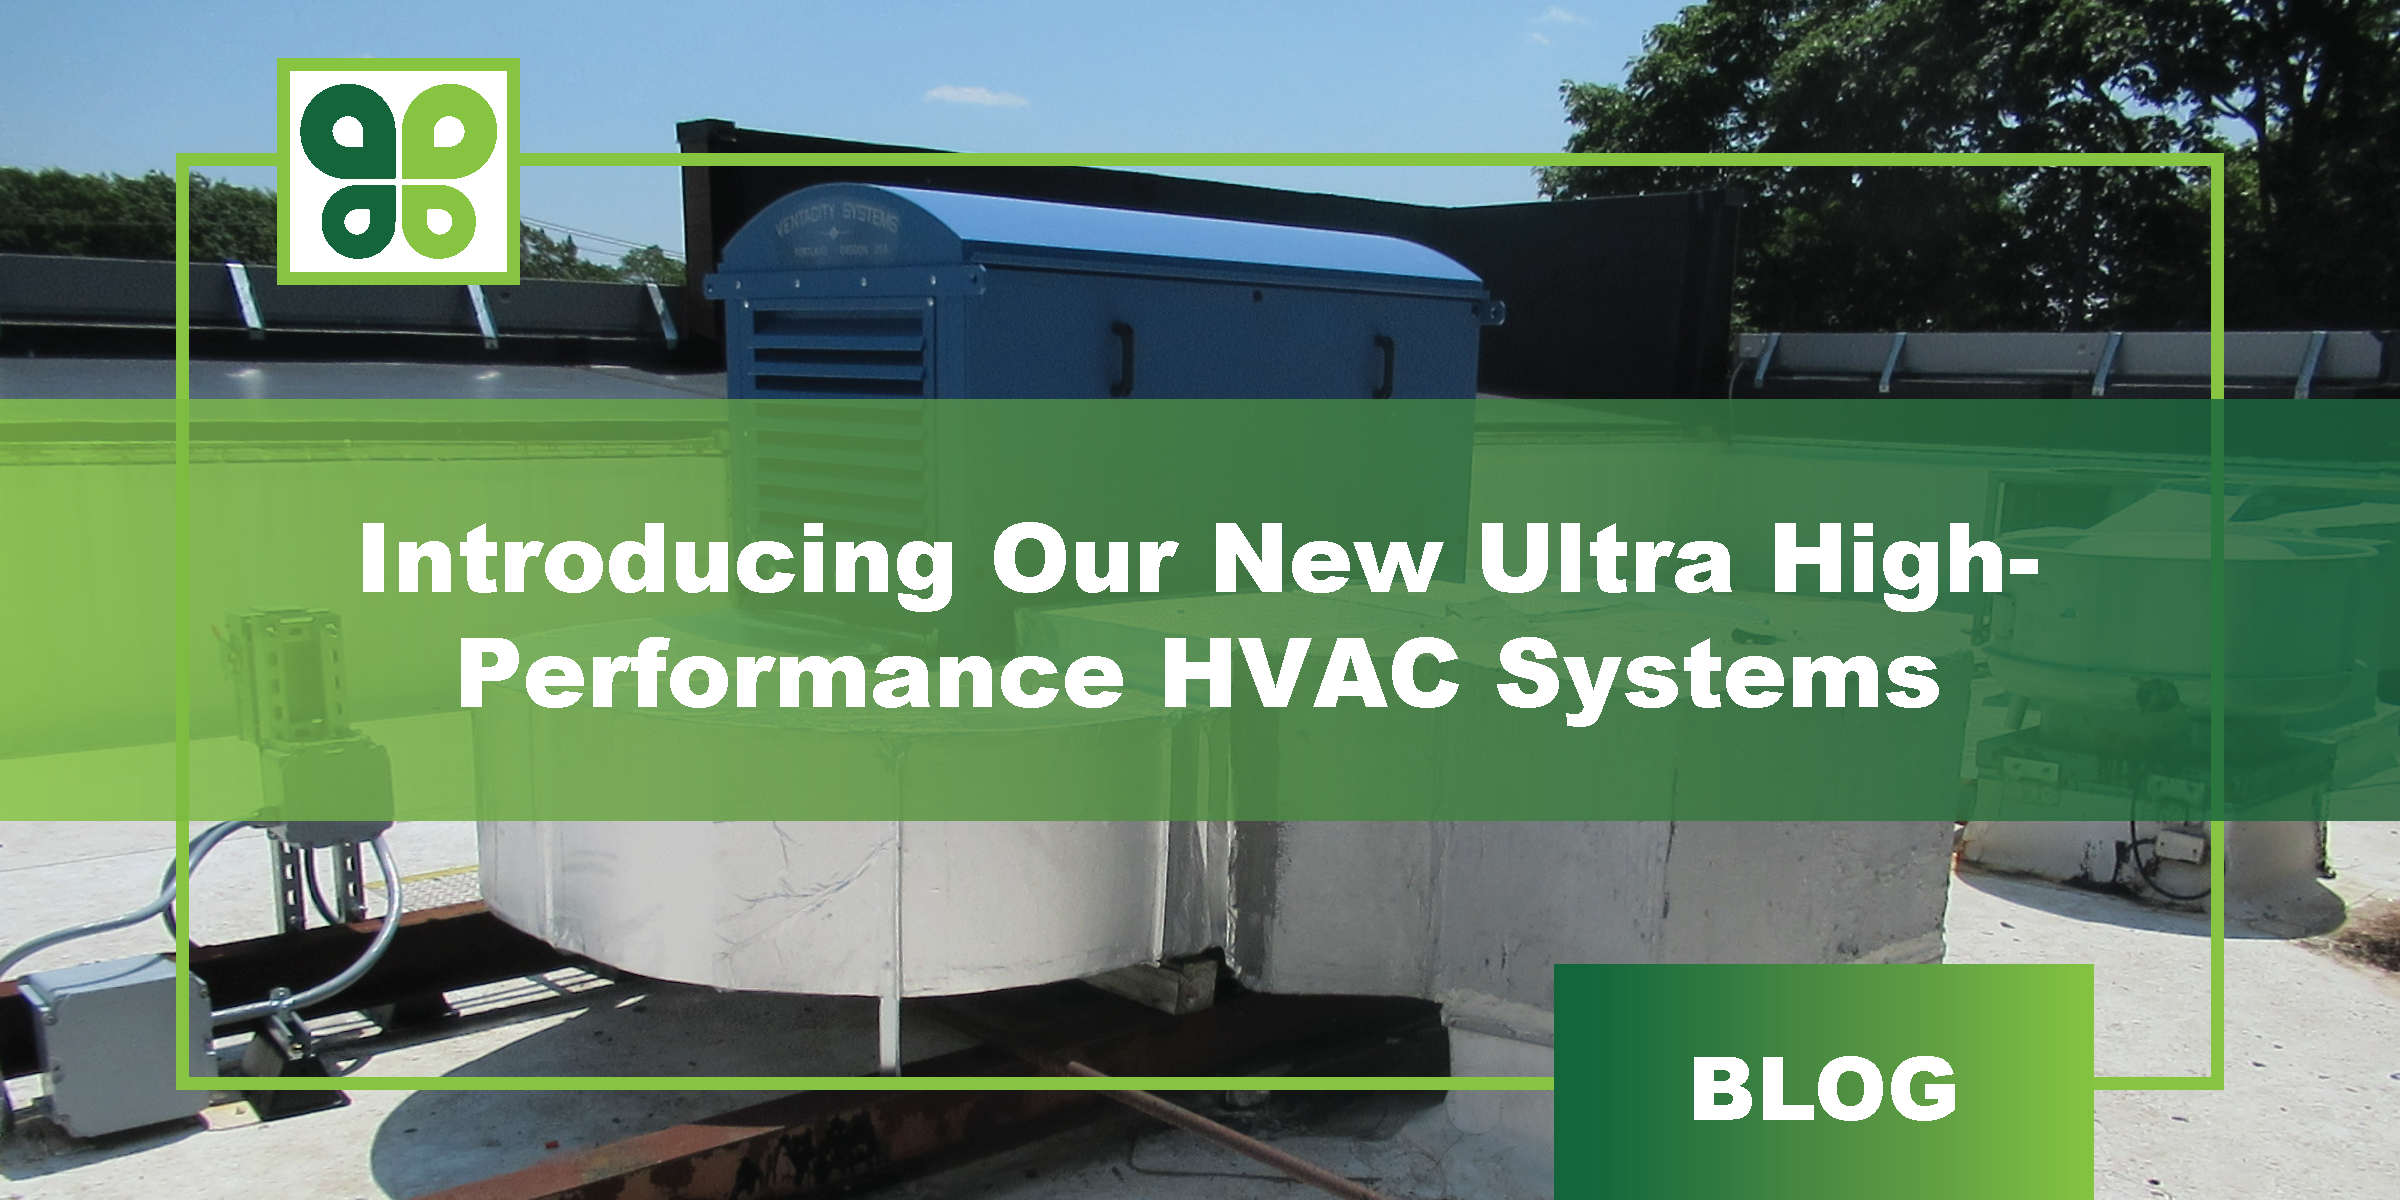 Introducing Our New Ultra High-Performance HVAC Systems